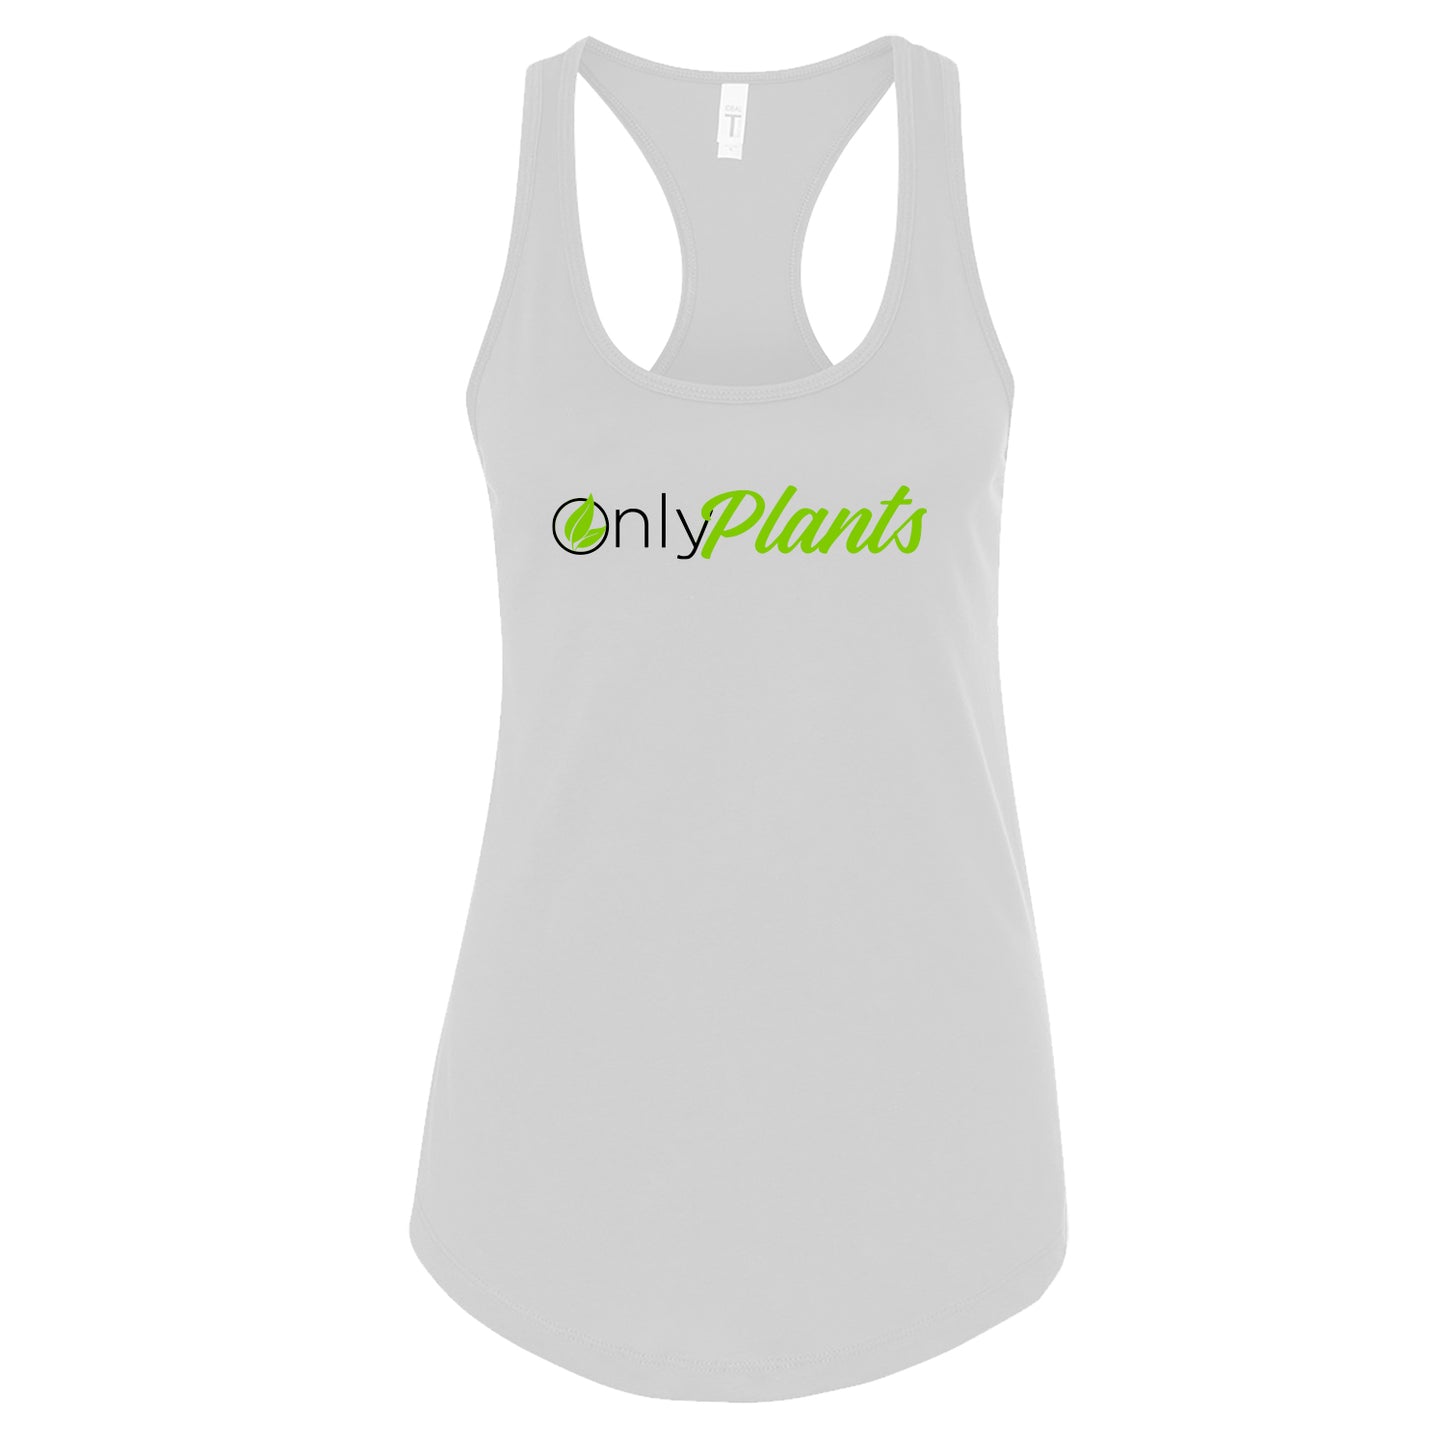 Only Plants Limited Edition Tanks & Tees - Available in Black & White